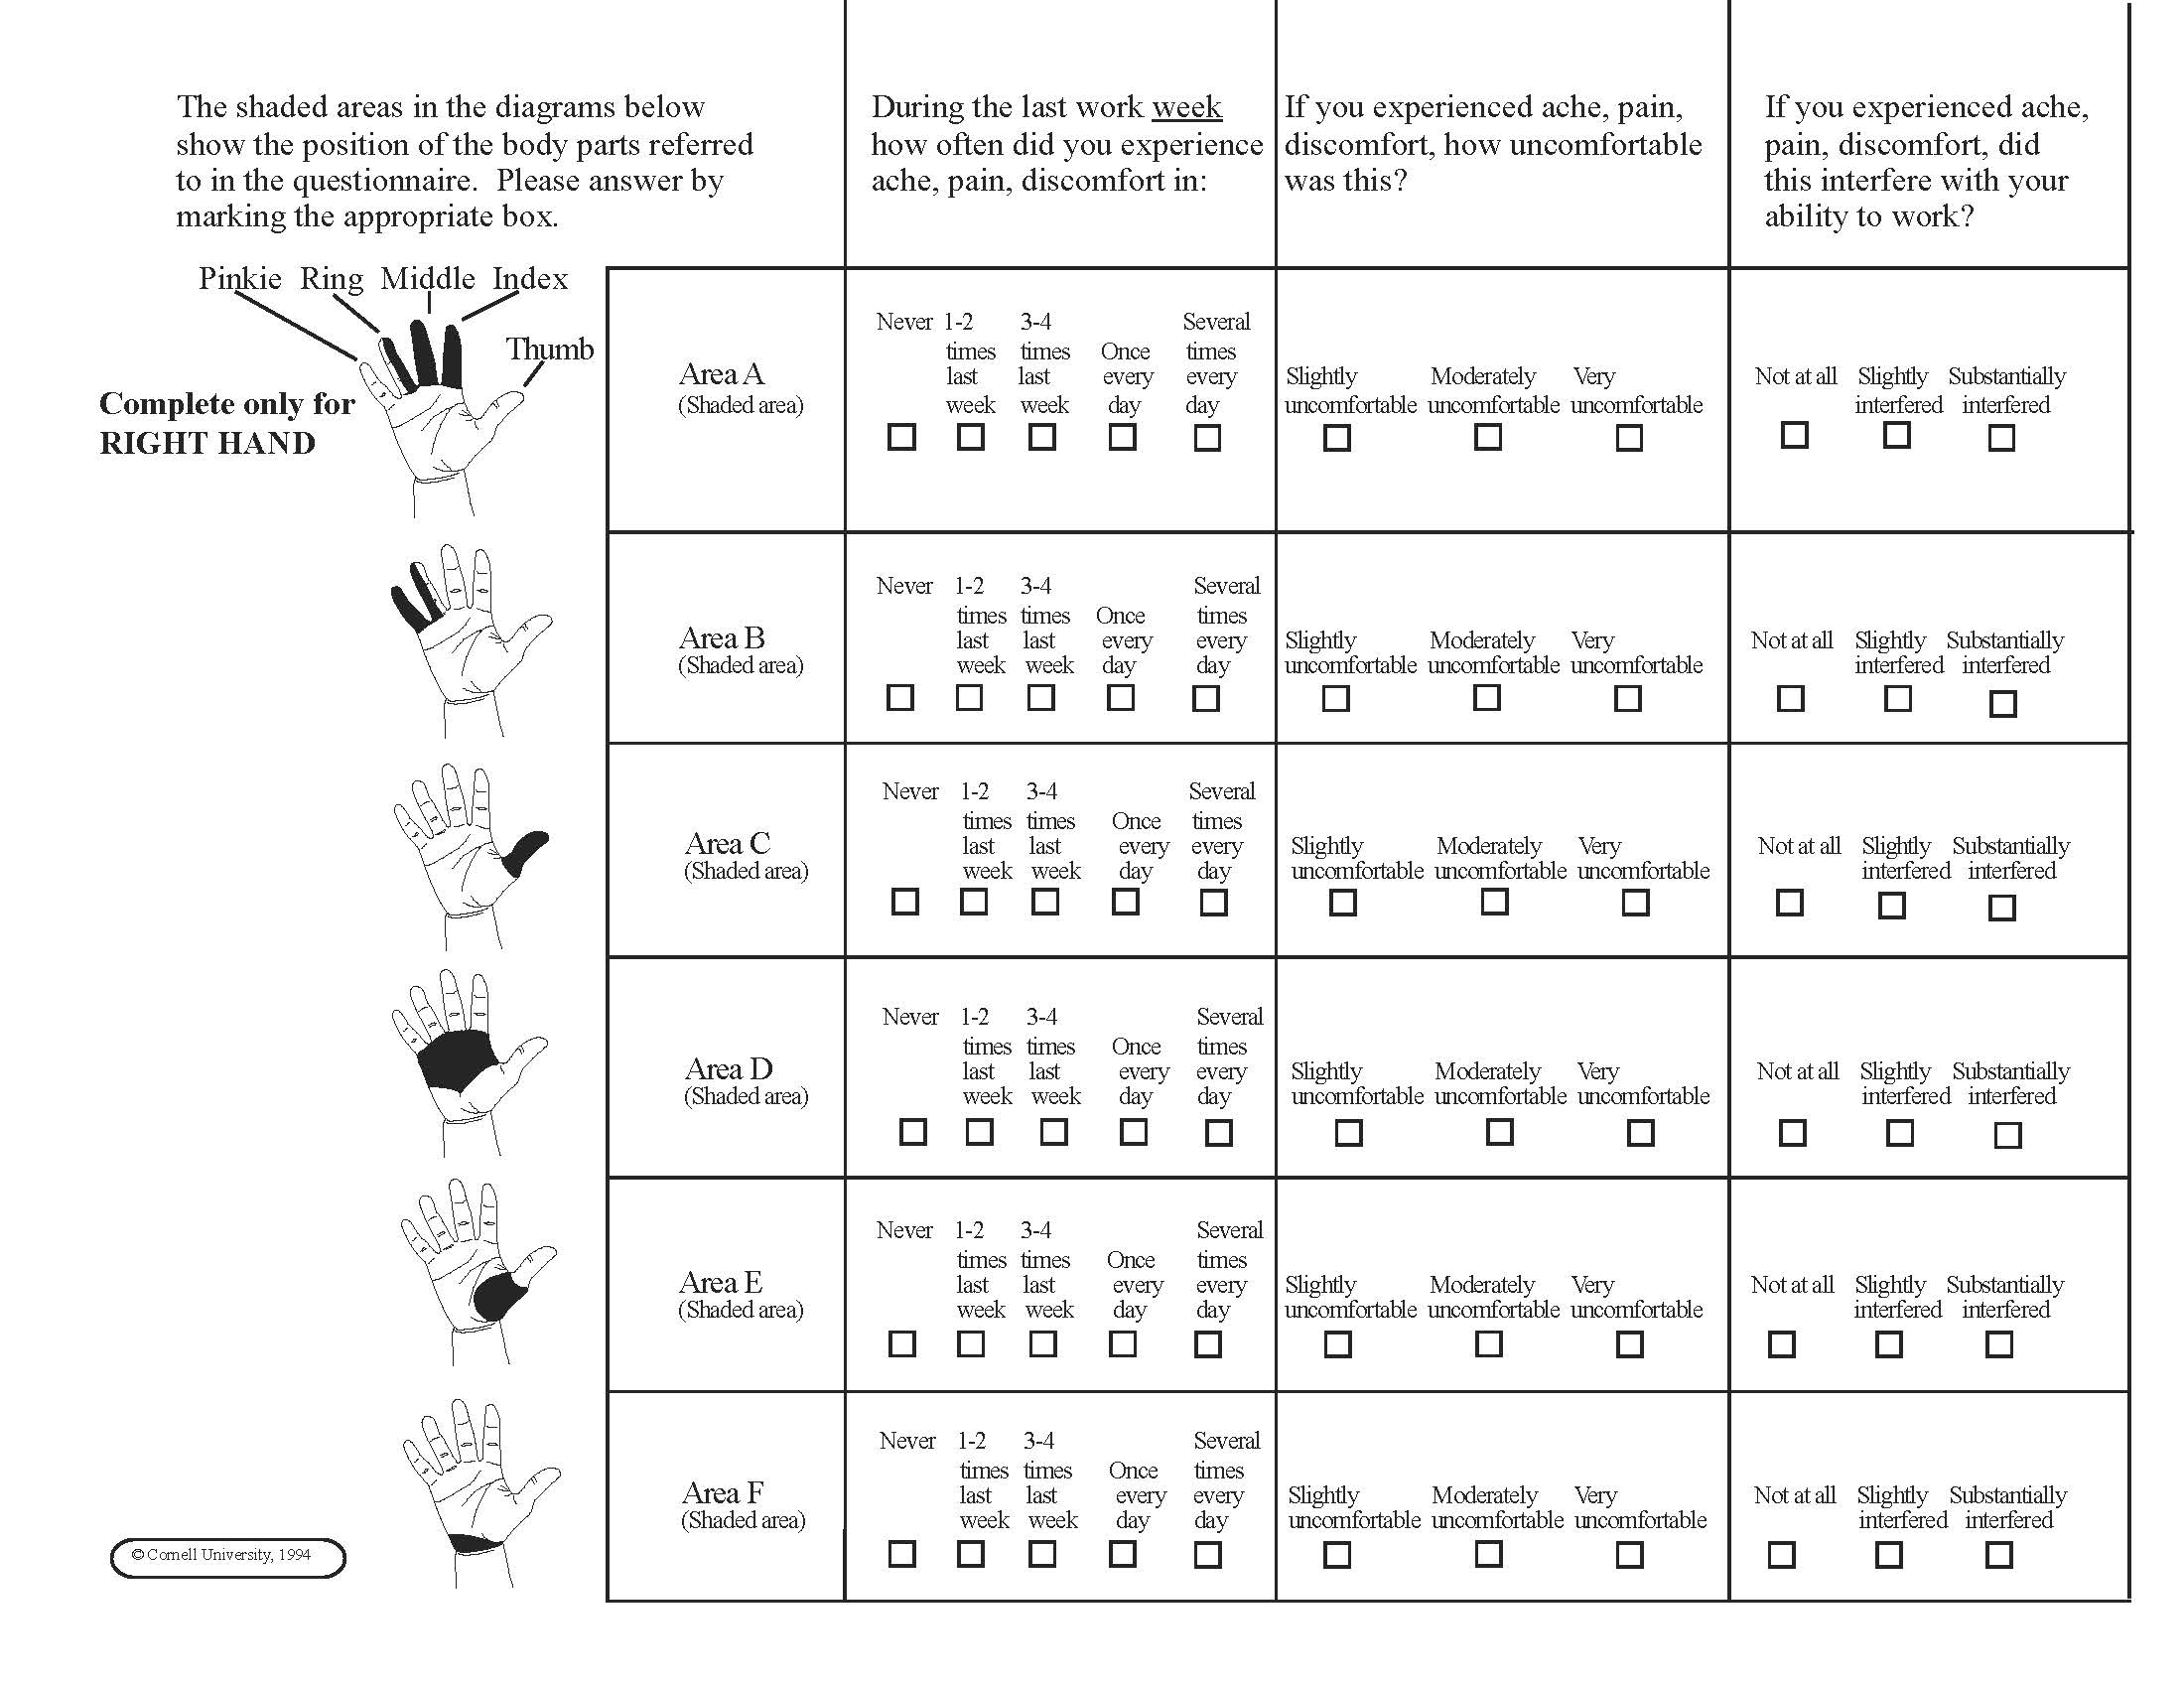 link to pdf of right hand self assessment